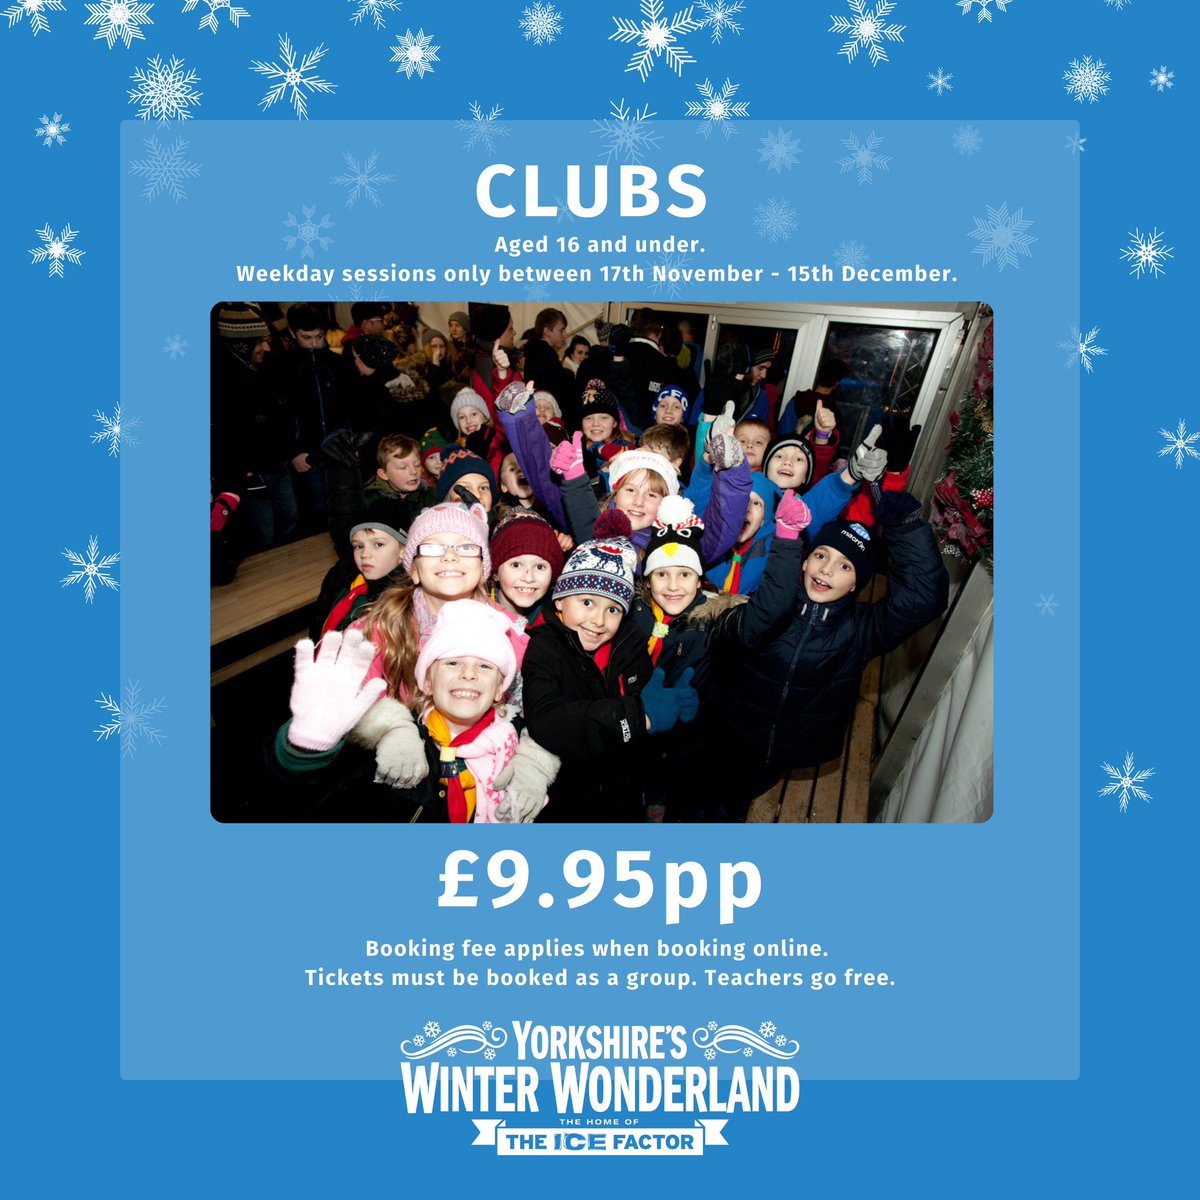 Check out our amazing Clubs deal!👧🏽🧒🏼 Available Monday - Friday on any session between November 17th - December 15th! ⛸️ Email us at admin@yorkshireswinterwonderland.com to make your club booking today☺️ #yorkshireswinterwonderland #york